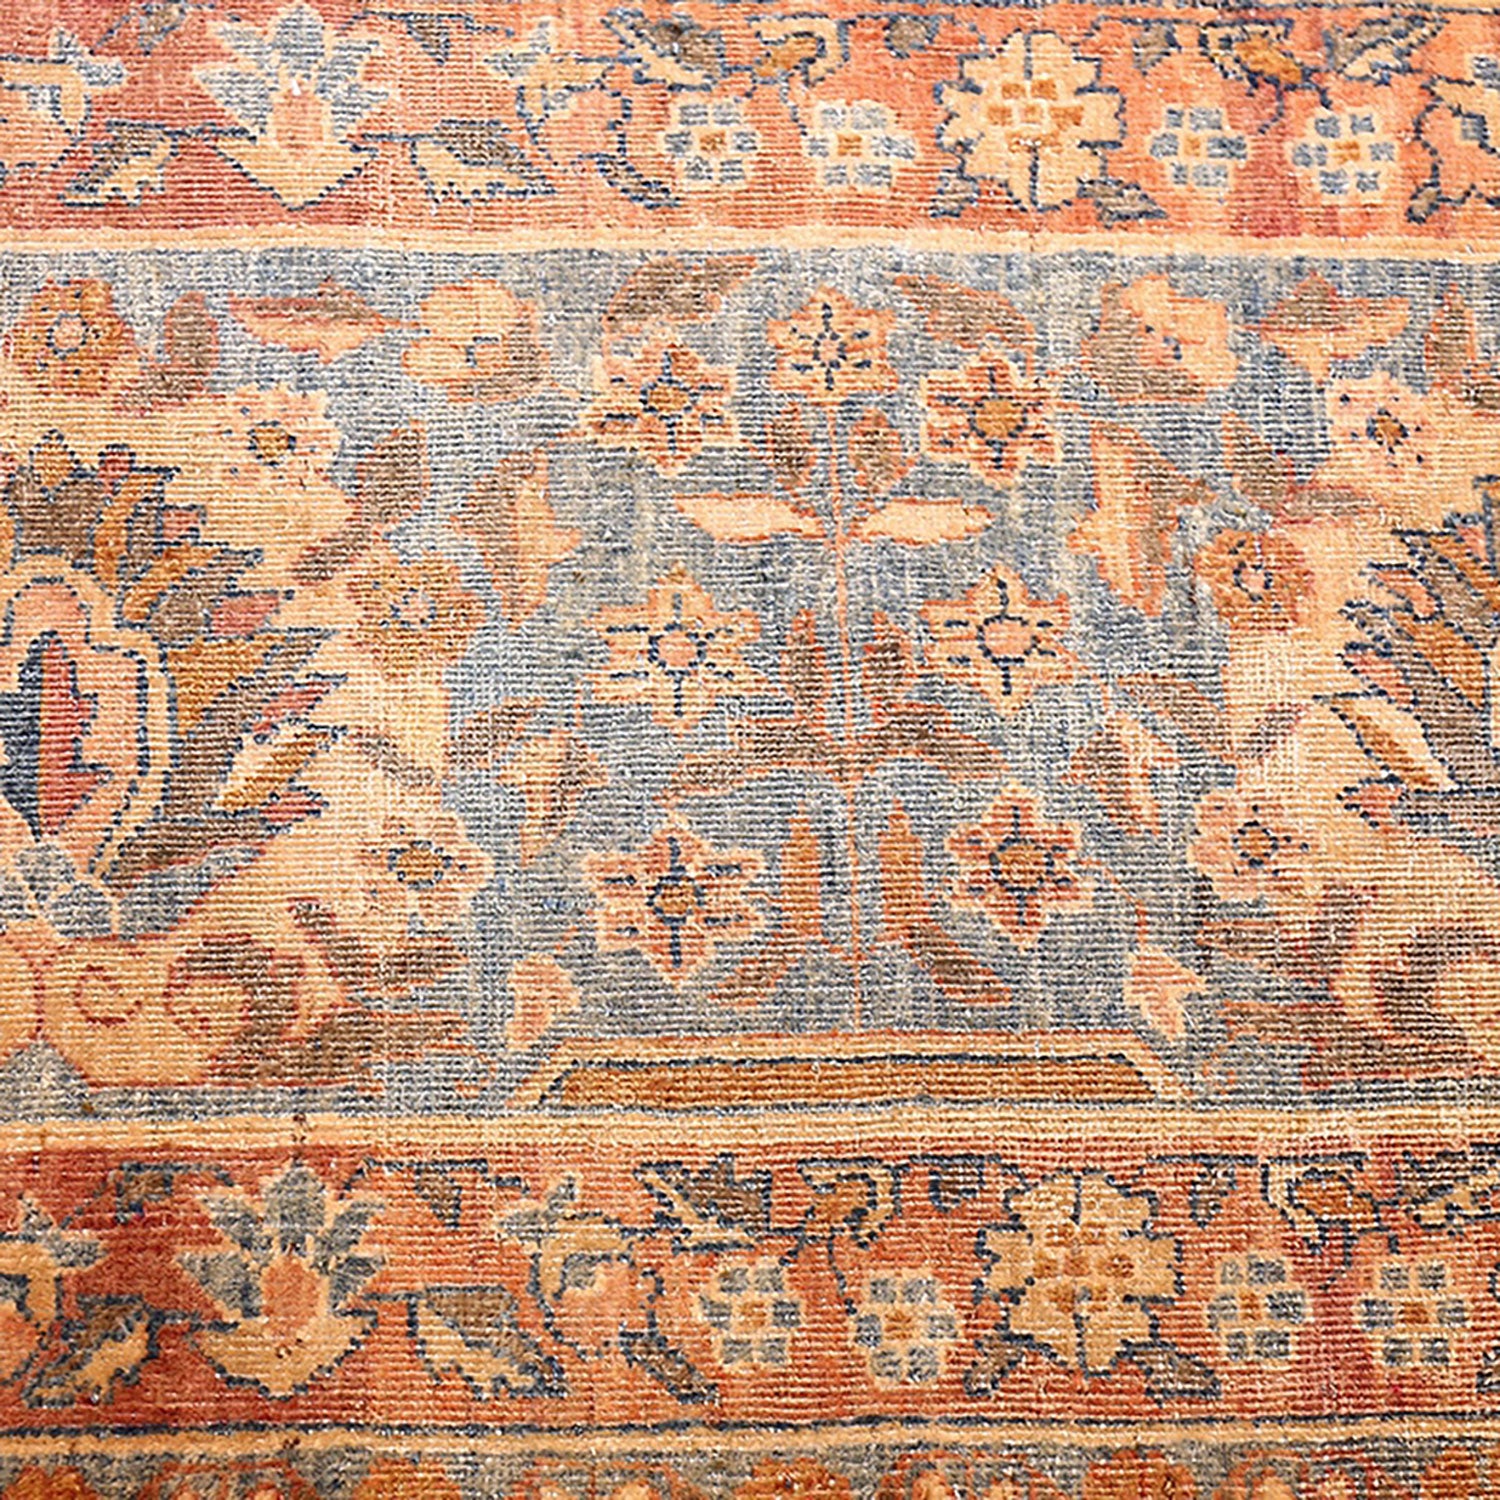 Close-up of an intricate, traditional rug with vibrant colors.